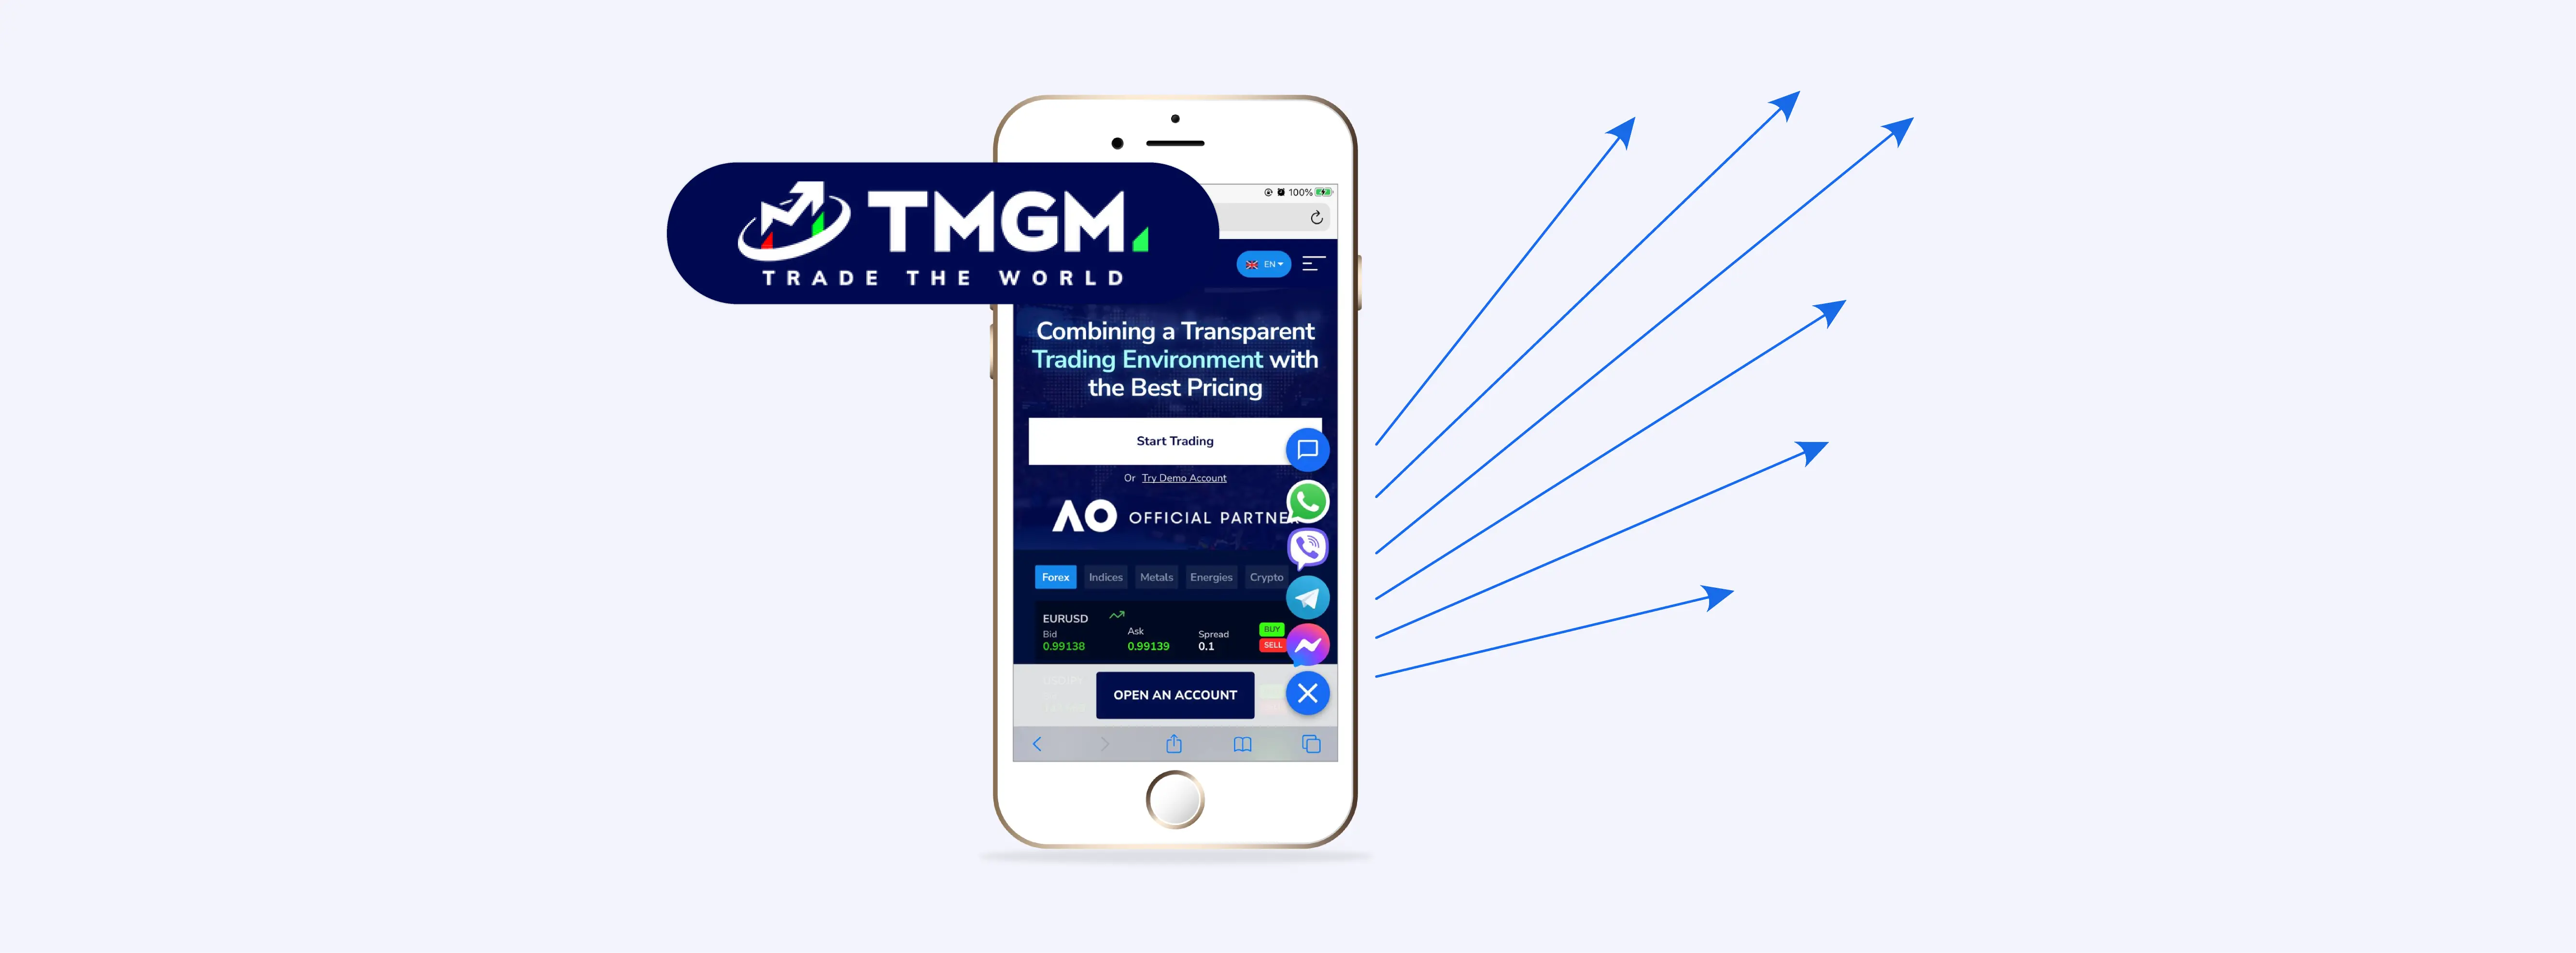 TMGM Utilizing an agnostic solution with a bespoke build